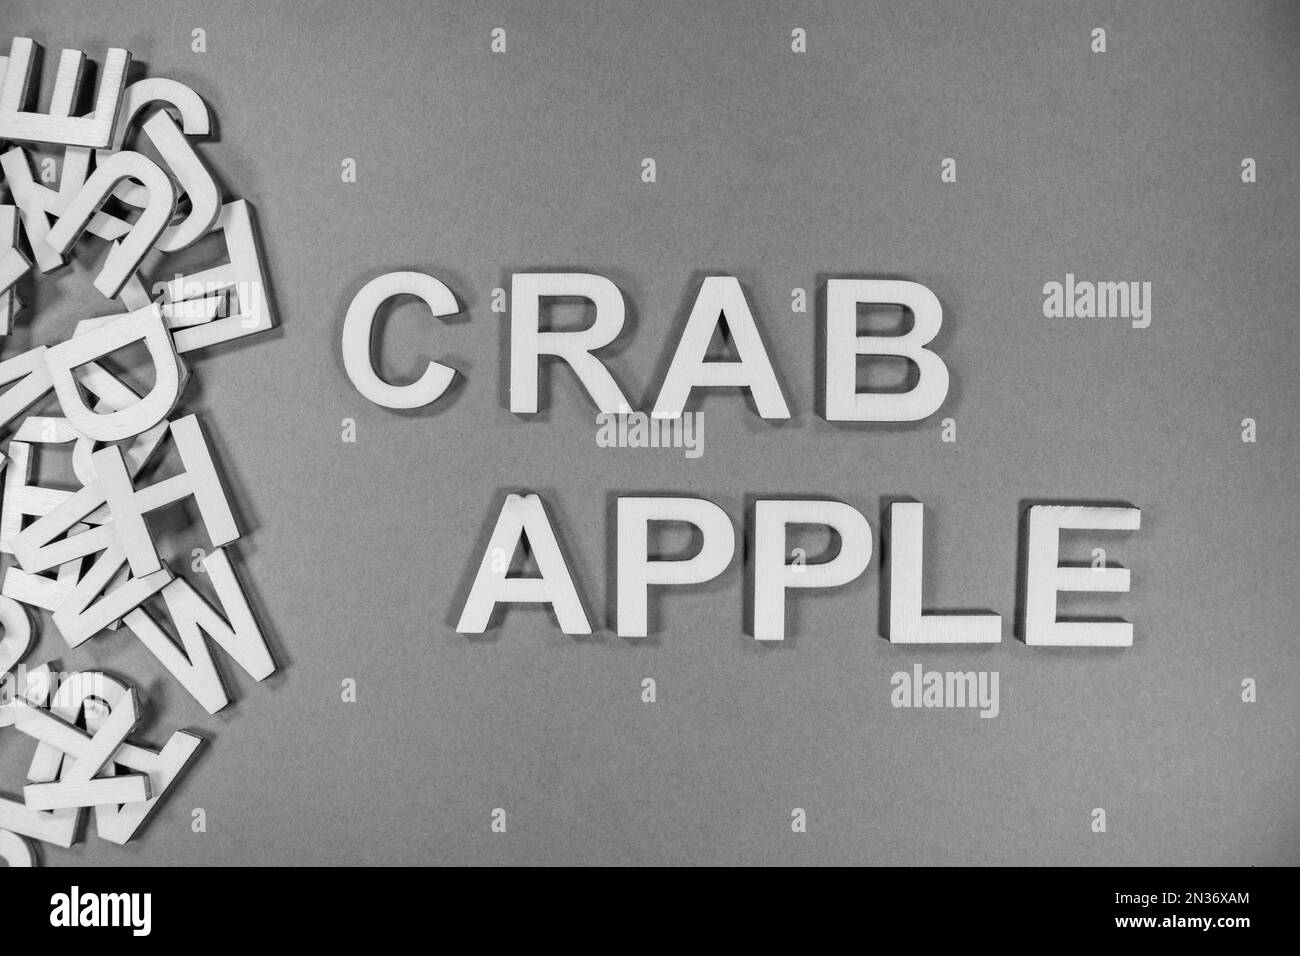 CRAB APPLE fruit in wooden English language capital letters spilling from a pile of letters in black and white Stock Photo